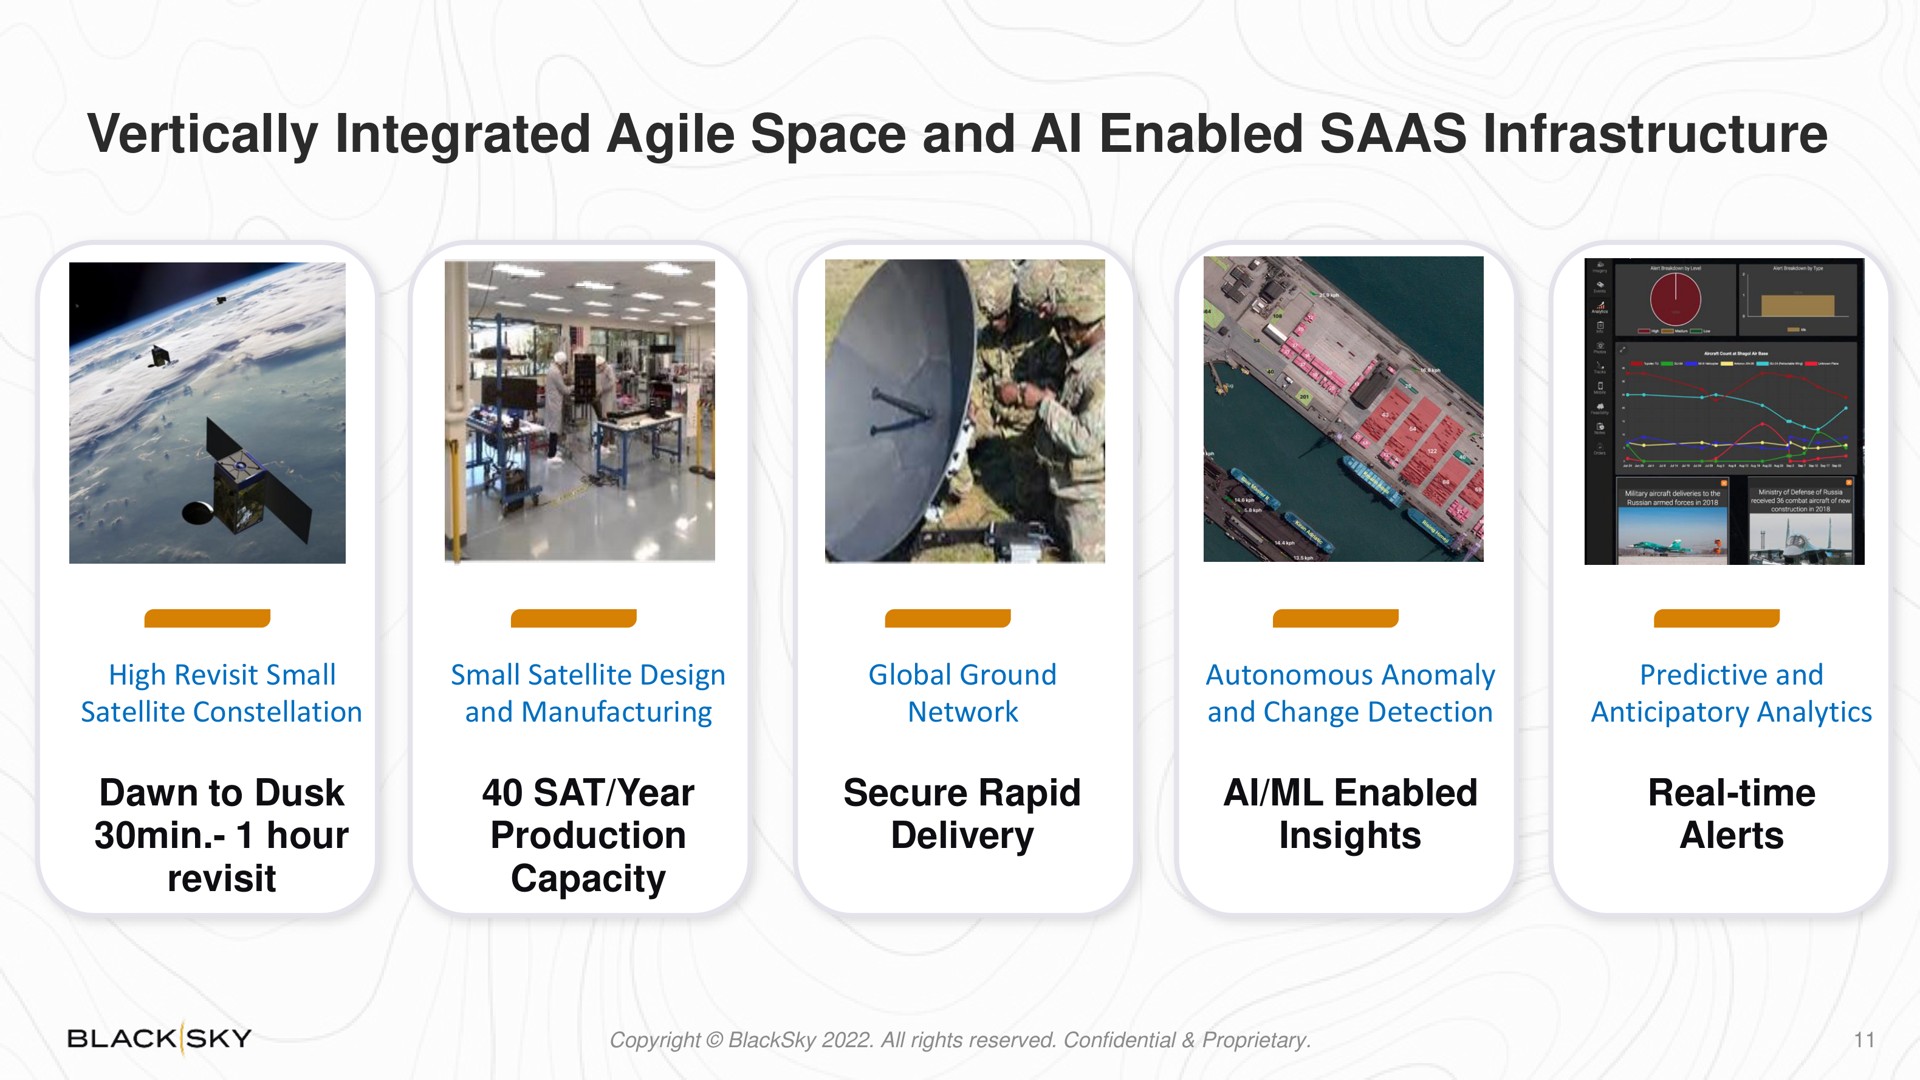 vertically integrated agile space and enabled infrastructure | BlackSky